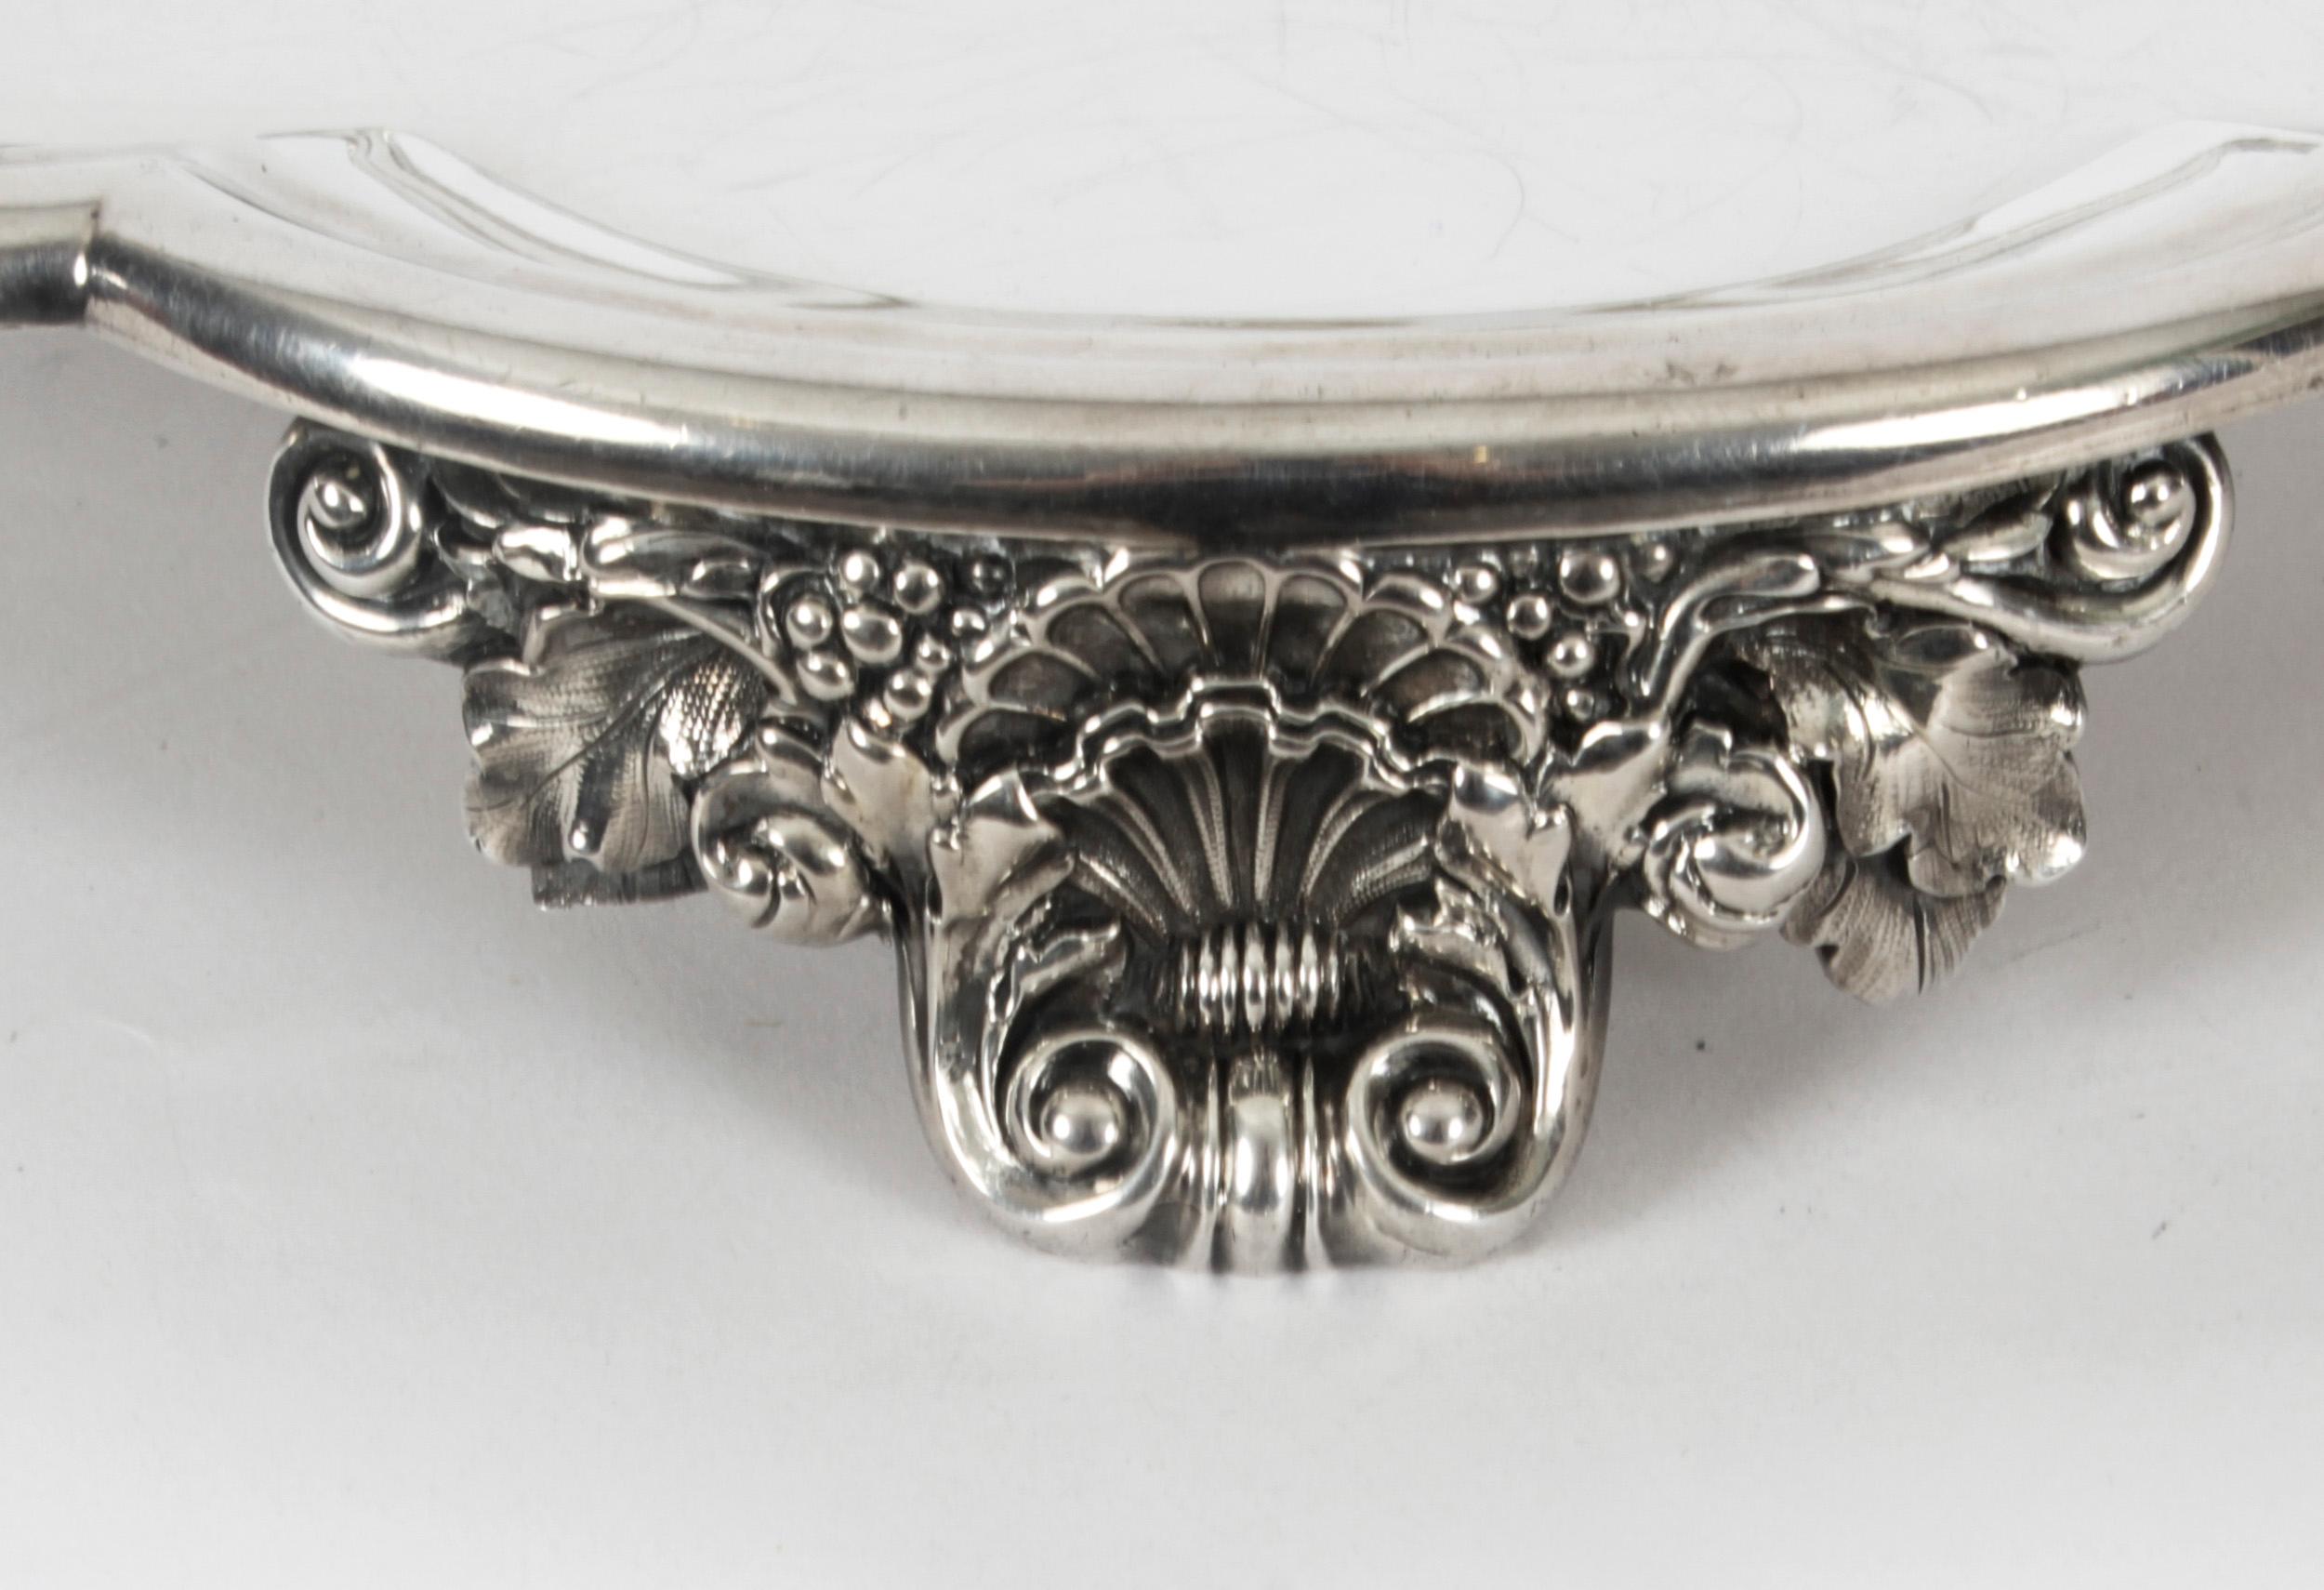 Antique George III Sterling Silver Salver by Paul Storr 1811 19th Century For Sale 3